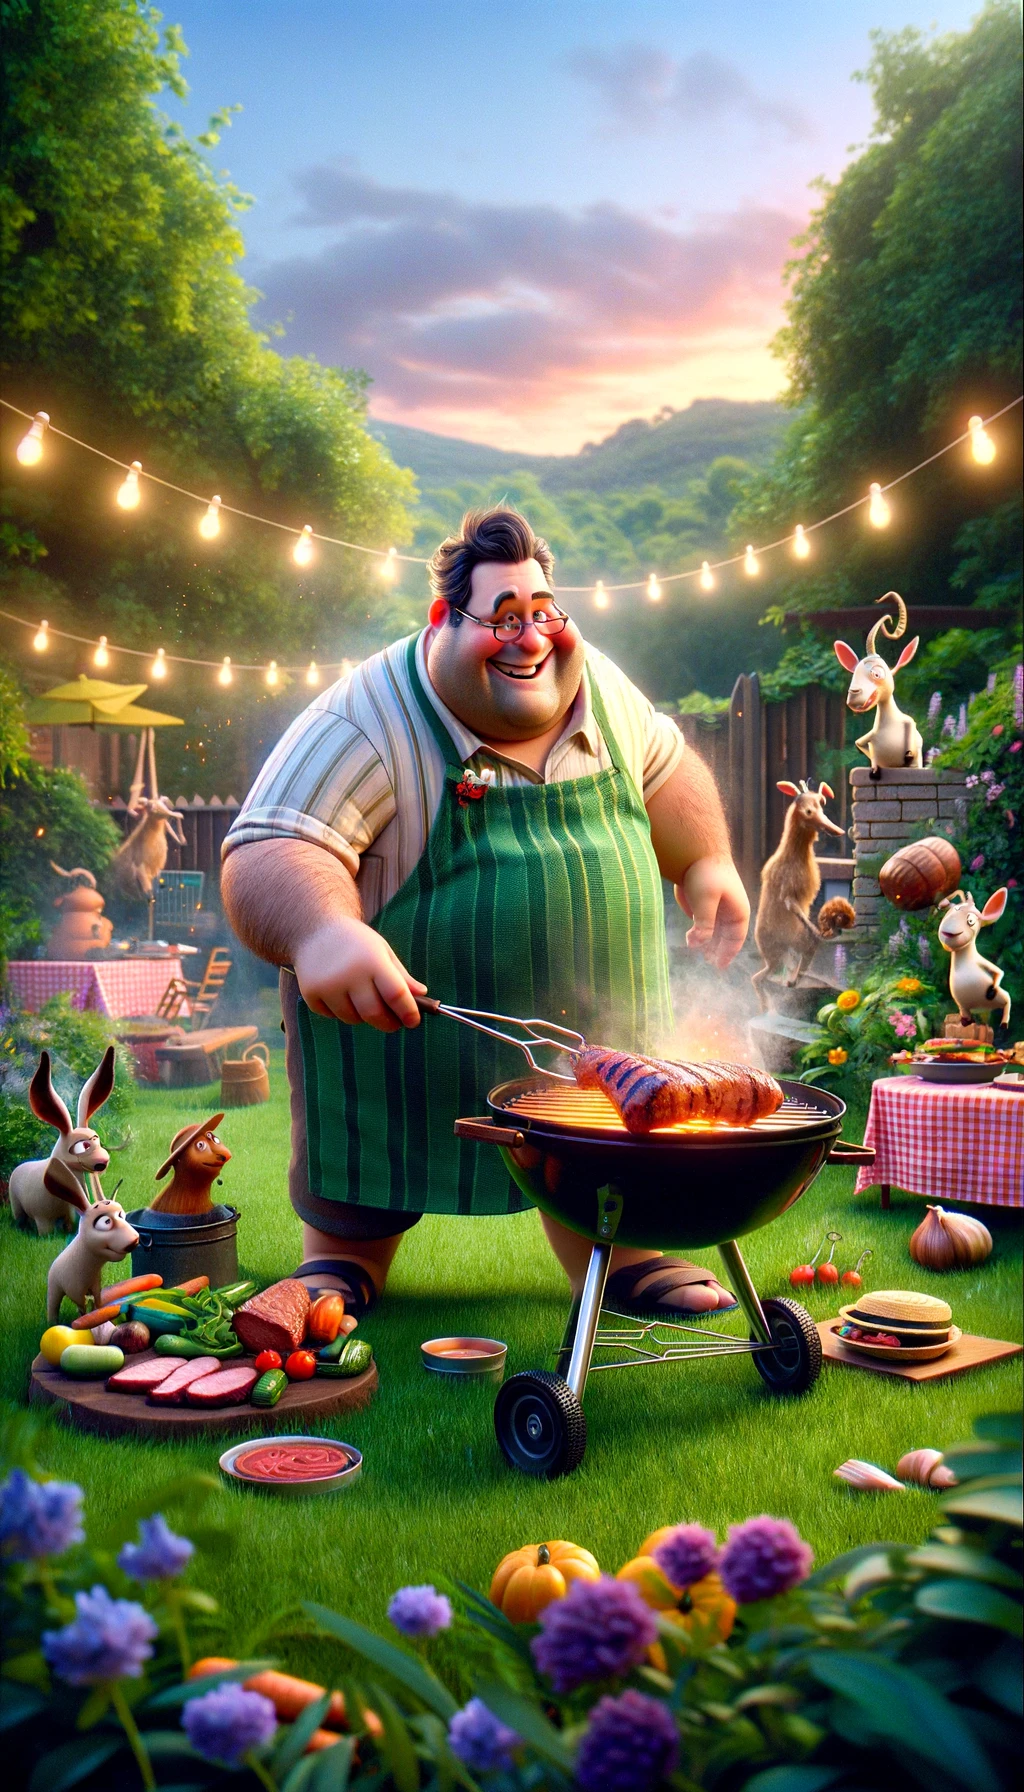 A charming Pixar animation poster depicting a man in the role of a master griller, cooking goat meat over a sizzling barbecue in his lush, green garden. He has a jolly, rotund figure, with a Pixar-esque friendly face, and is dressed in casual summer clothes with a quirky apron. Around him, a variety of anthropomorphized barbecue tools and ingredients add a touch of magic to the scene, and the atmosphere is festive with string lights above and a checkered picnic blanket on the grass.